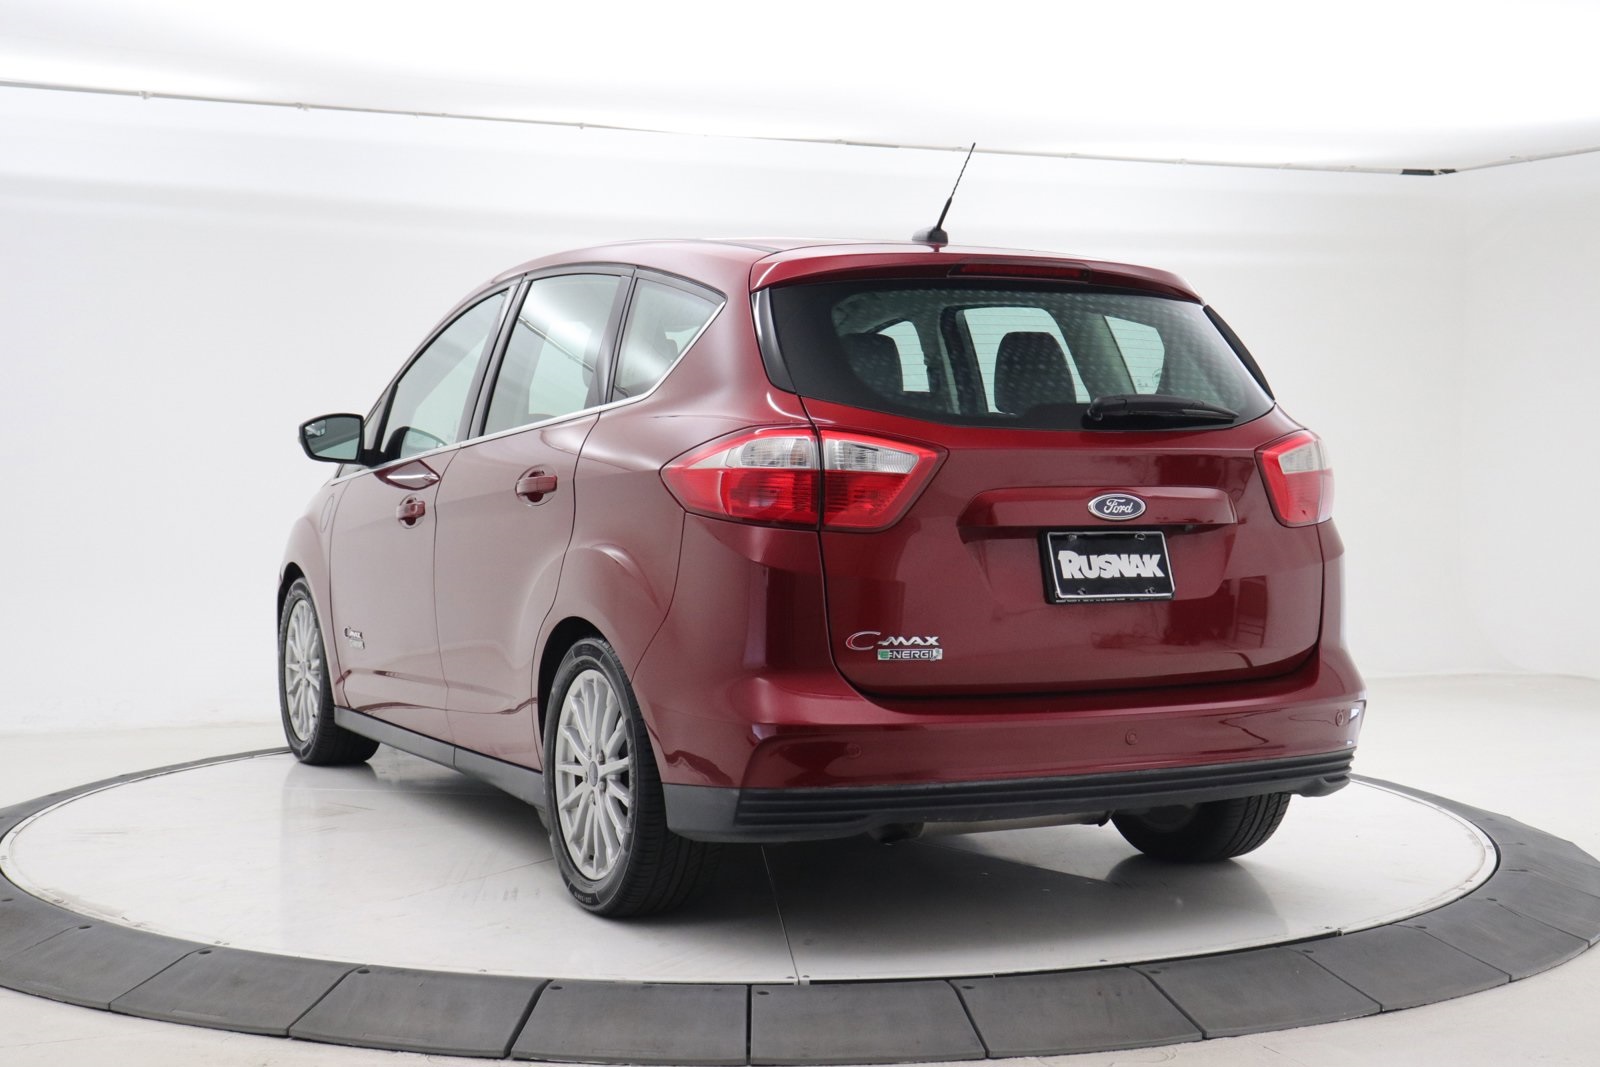 Pre-Owned 2016 Ford C-Max Energi SEL 4D Hatchback in Pasadena #16T02395 |  Rusnak Auto Group